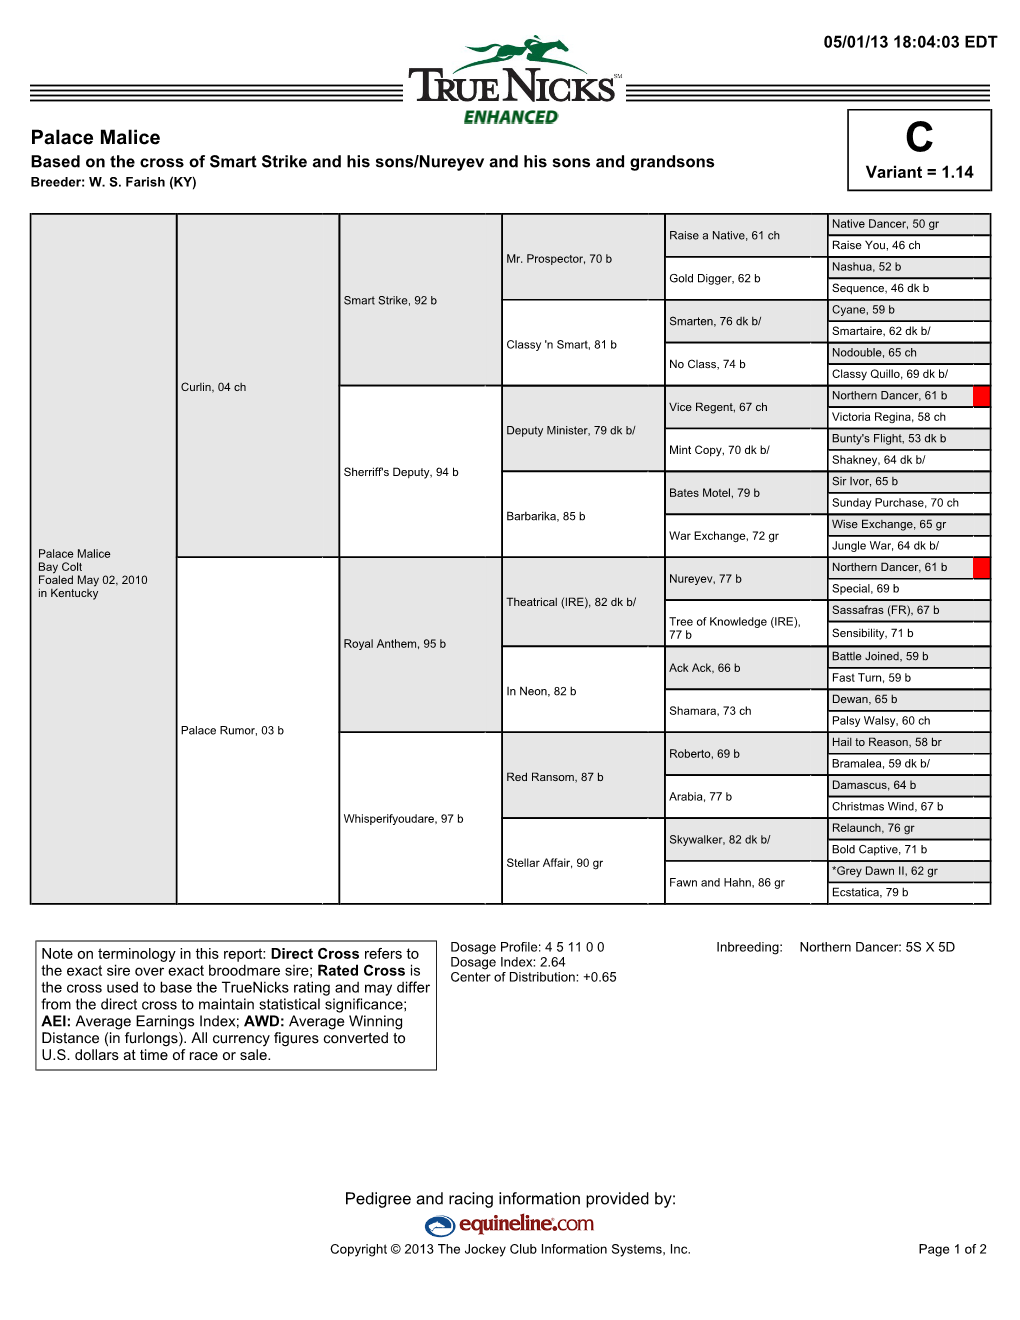 Palace Malice C Based on the Cross of Smart Strike and His Sons/Nureyev and His Sons and Grandsons Variant = 1.14 Breeder: W